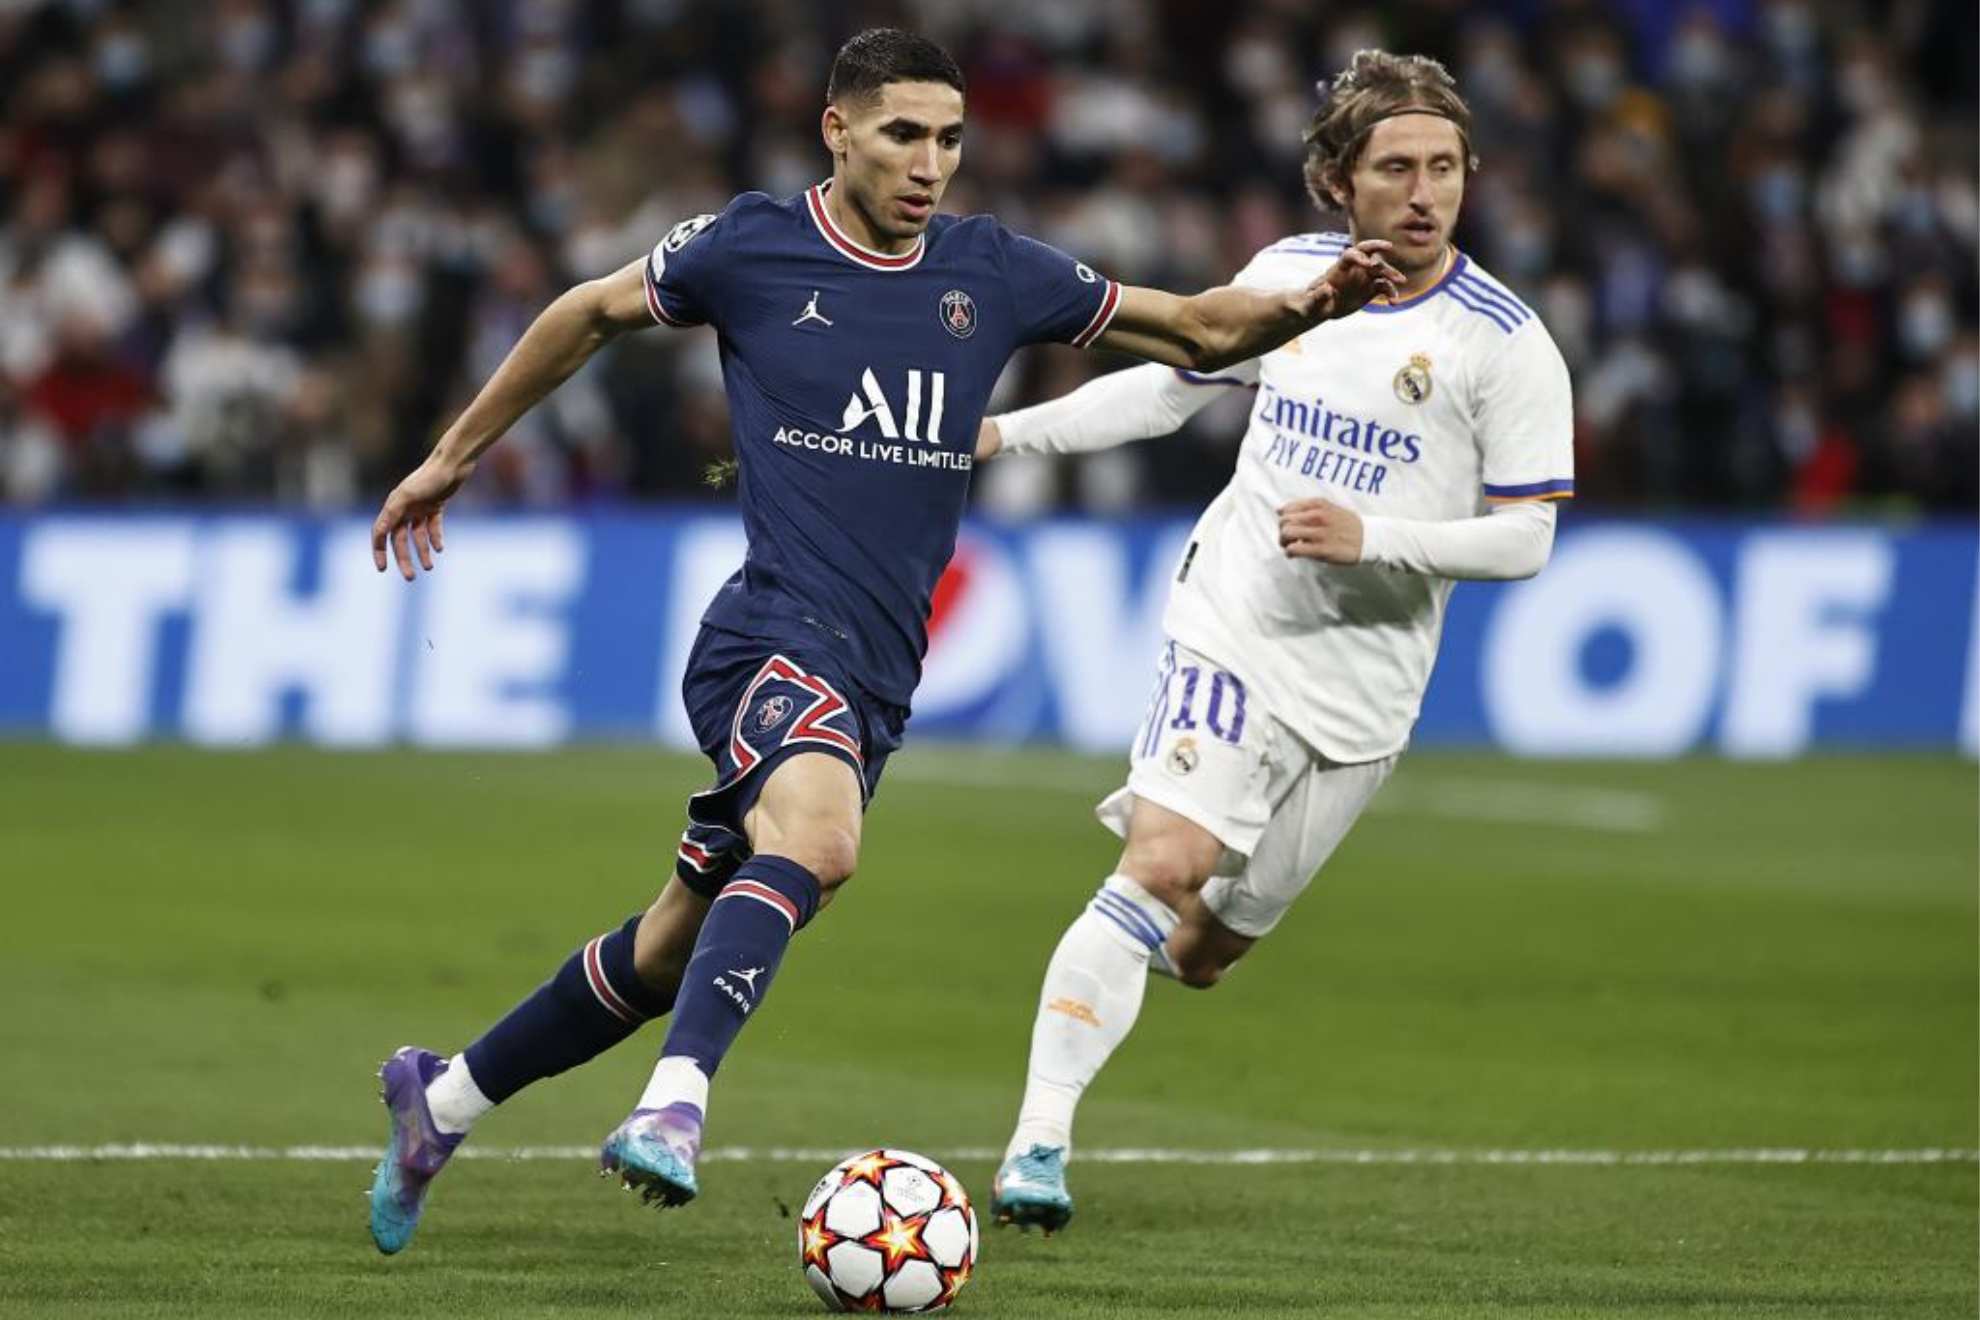 Manchester City want to sign PSG star, and Mbappe's best friend, Achraf Hakimi